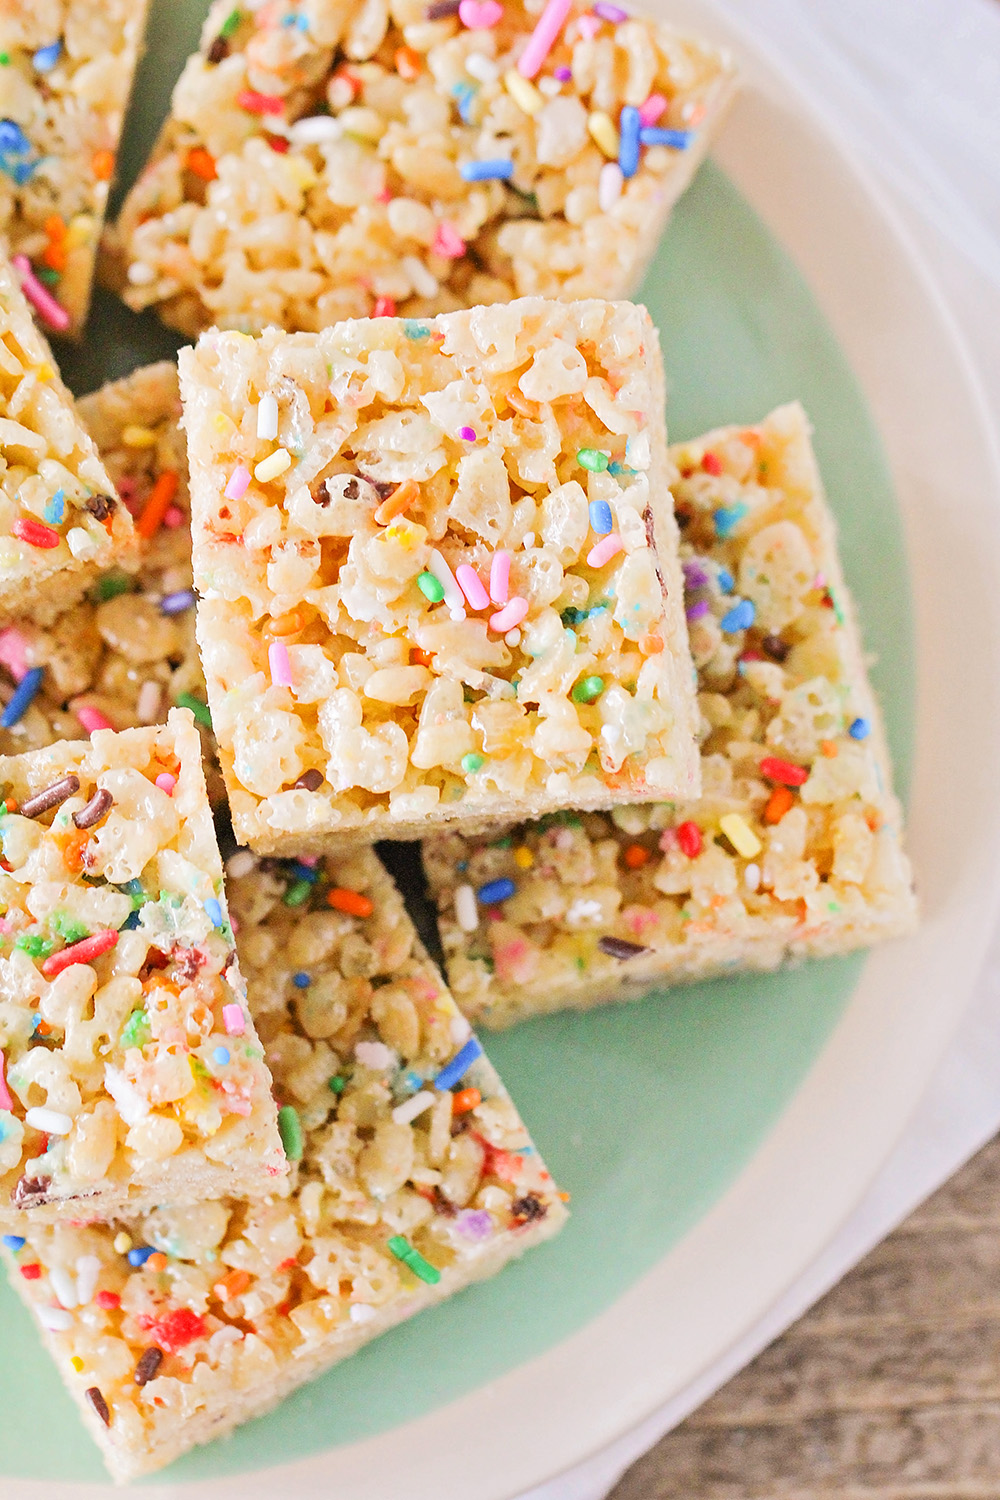 These cake batter rice krispy treats taste just like birthday cake and are loaded with colorful sprinkles. So easy to make and the kids will love them!